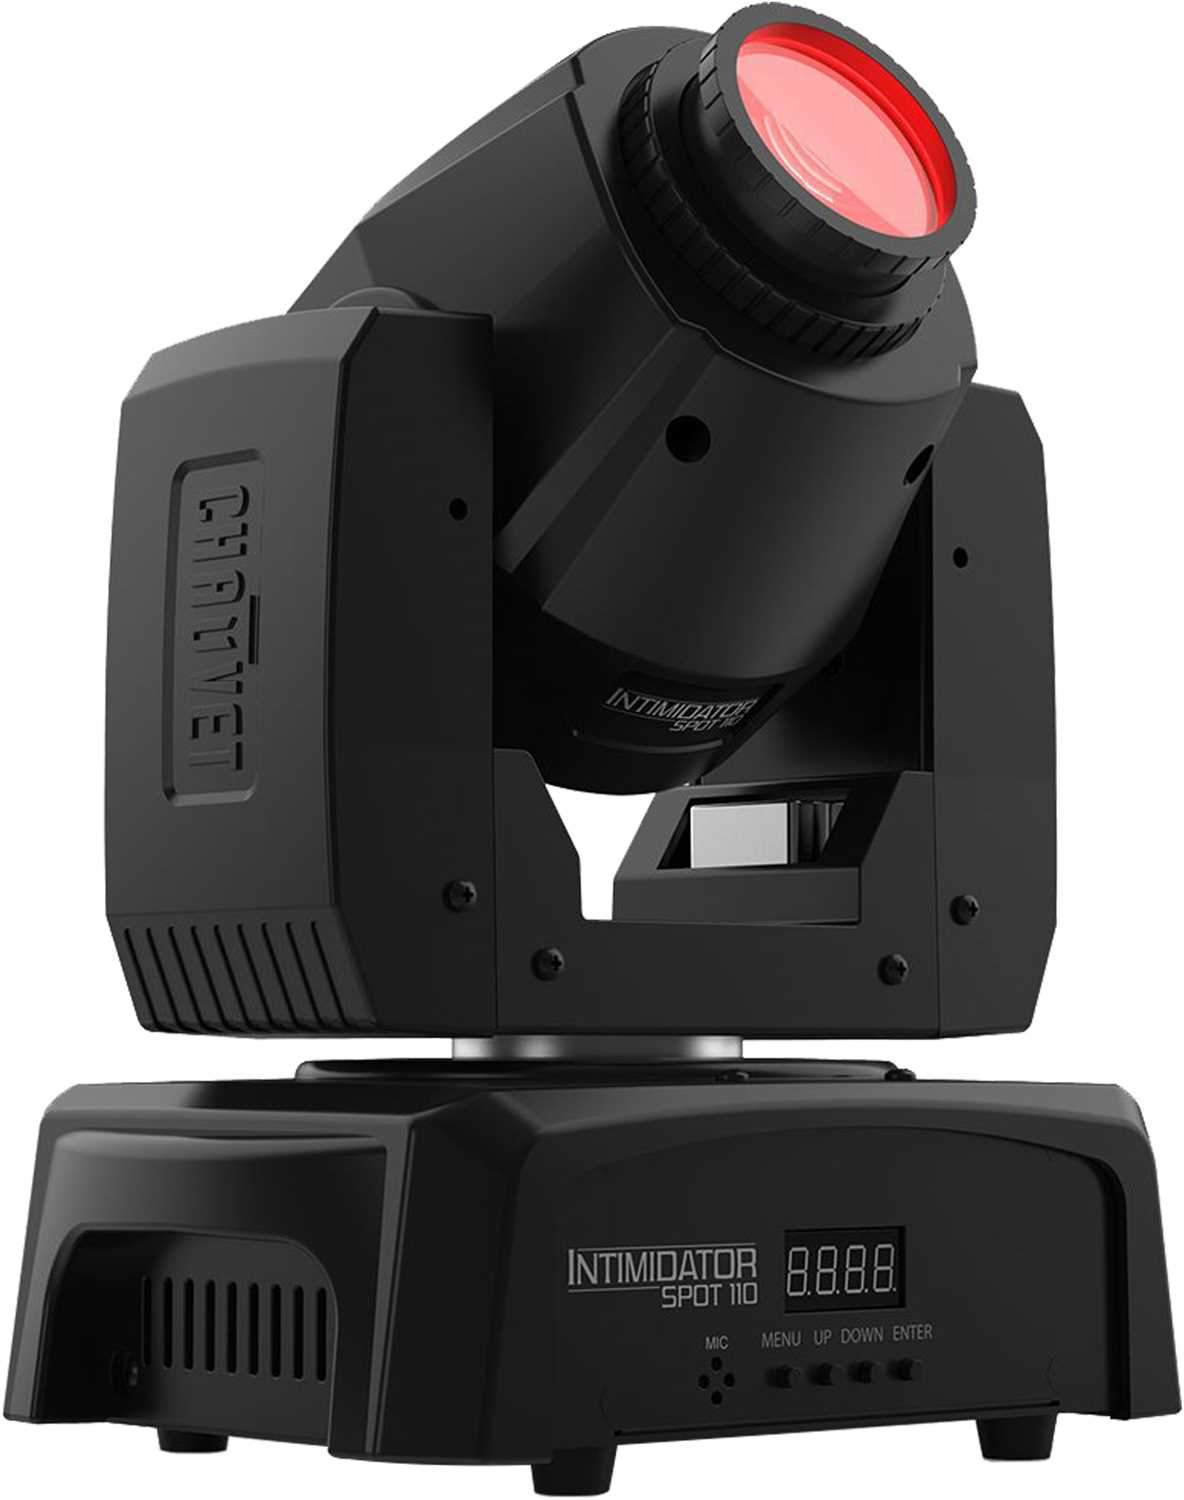 Chauvet Intimidator Spot 110 Moving Head 2-Pack with DMX Controller - PSSL ProSound and Stage Lighting